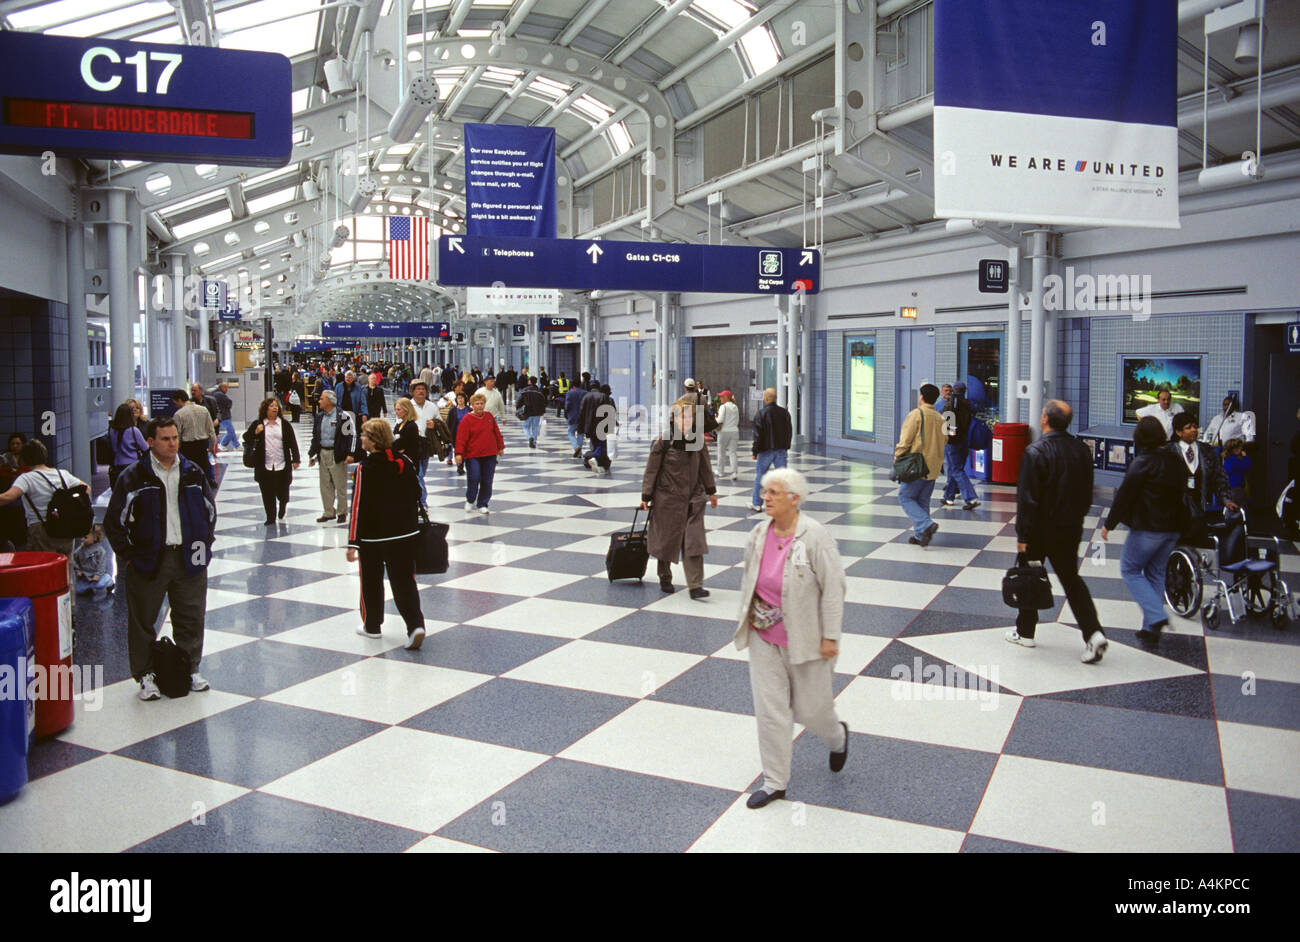 United Airlines-Halle am O Hare Air Terminal in Chicago IL Stockfoto